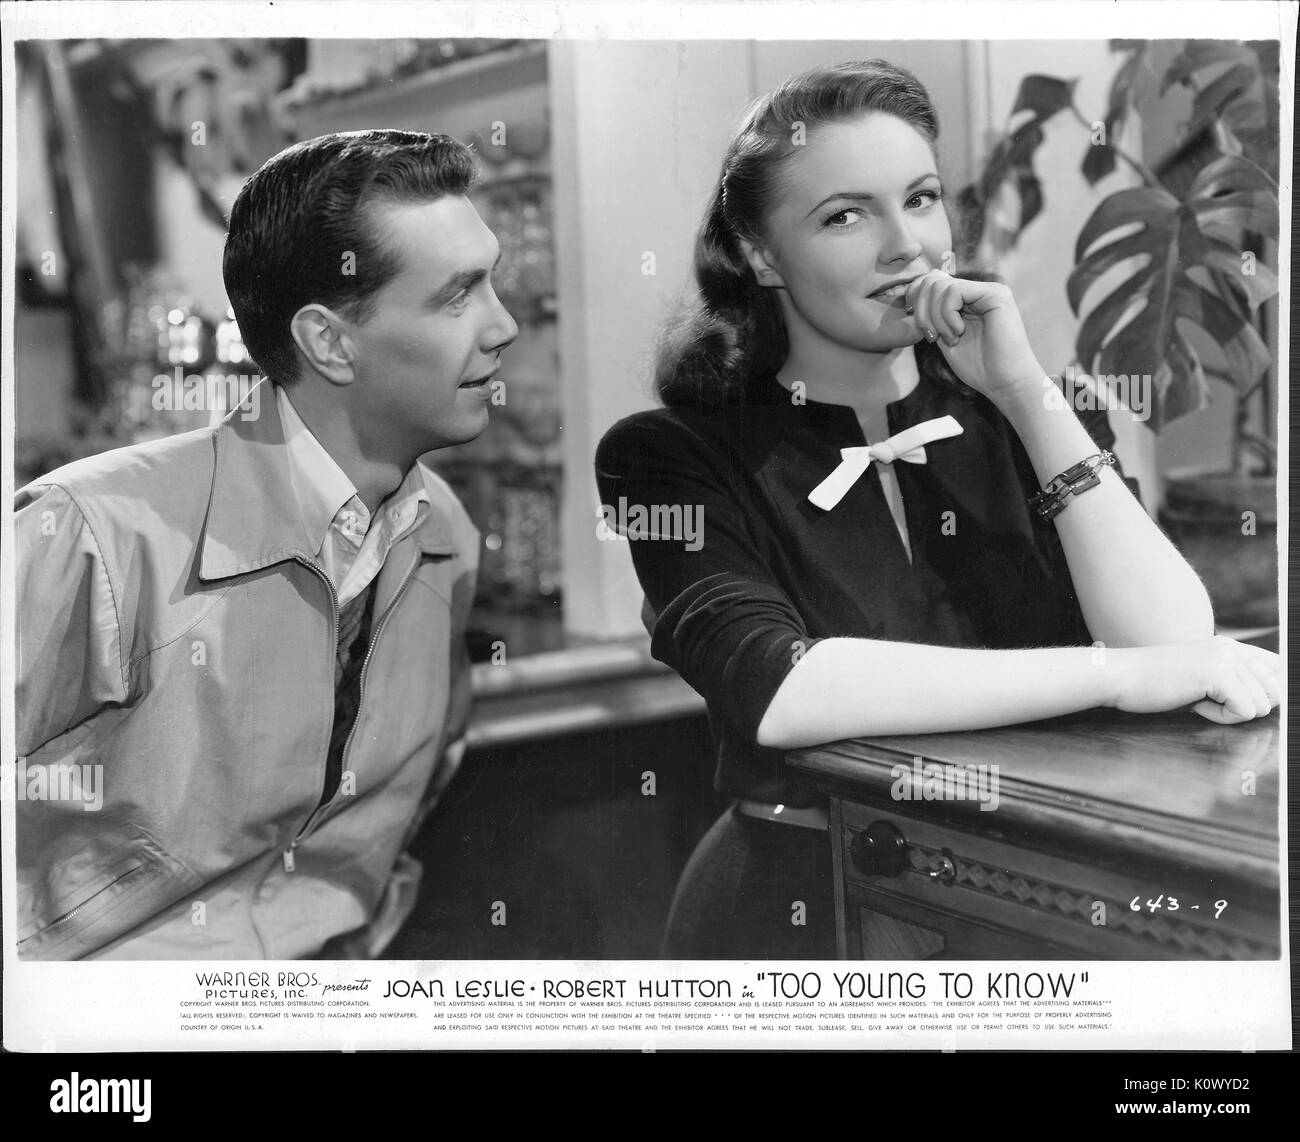 A movie still scene from 'Too Young To Know' (1945 American drama film), a Warner Bros Pictures production, showing a young man trying to amuse a young lady, 1945. Stock Photo